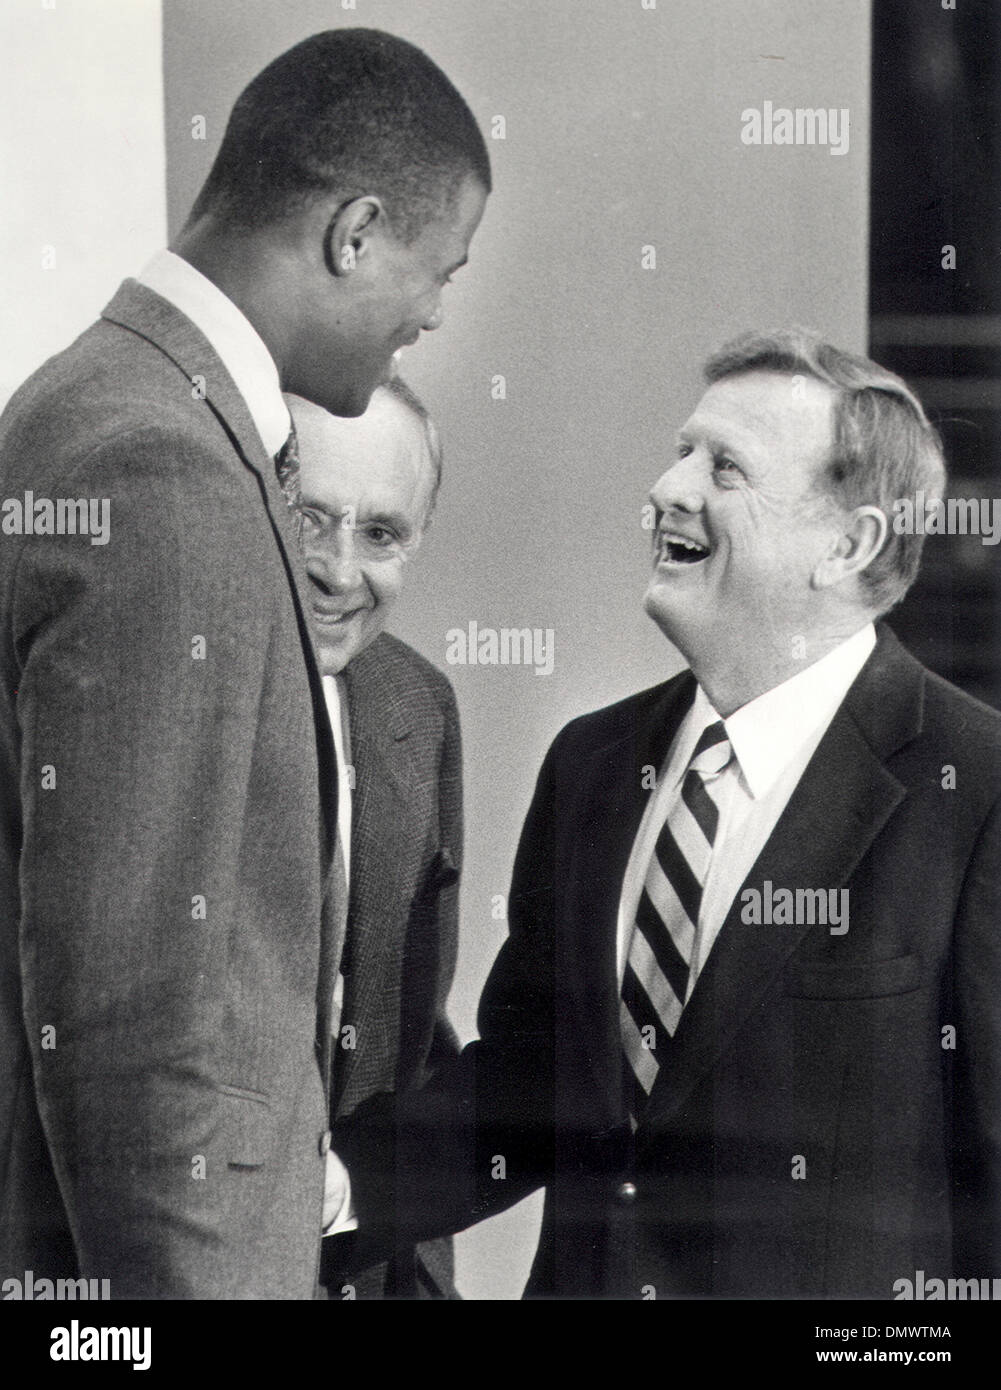 Jan 01, 1987 - San Antonio, Texas, U.S. - RED MCCOMBS (right) shaking hands with first-round draft pick DAVID ROBINSON after Robinson announced he would play with the Spurs. The photo was taken in 1987.  (Credit Image: © Jim Blaylock/San Antonio Express-News/ZUMApress.com) Stock Photo